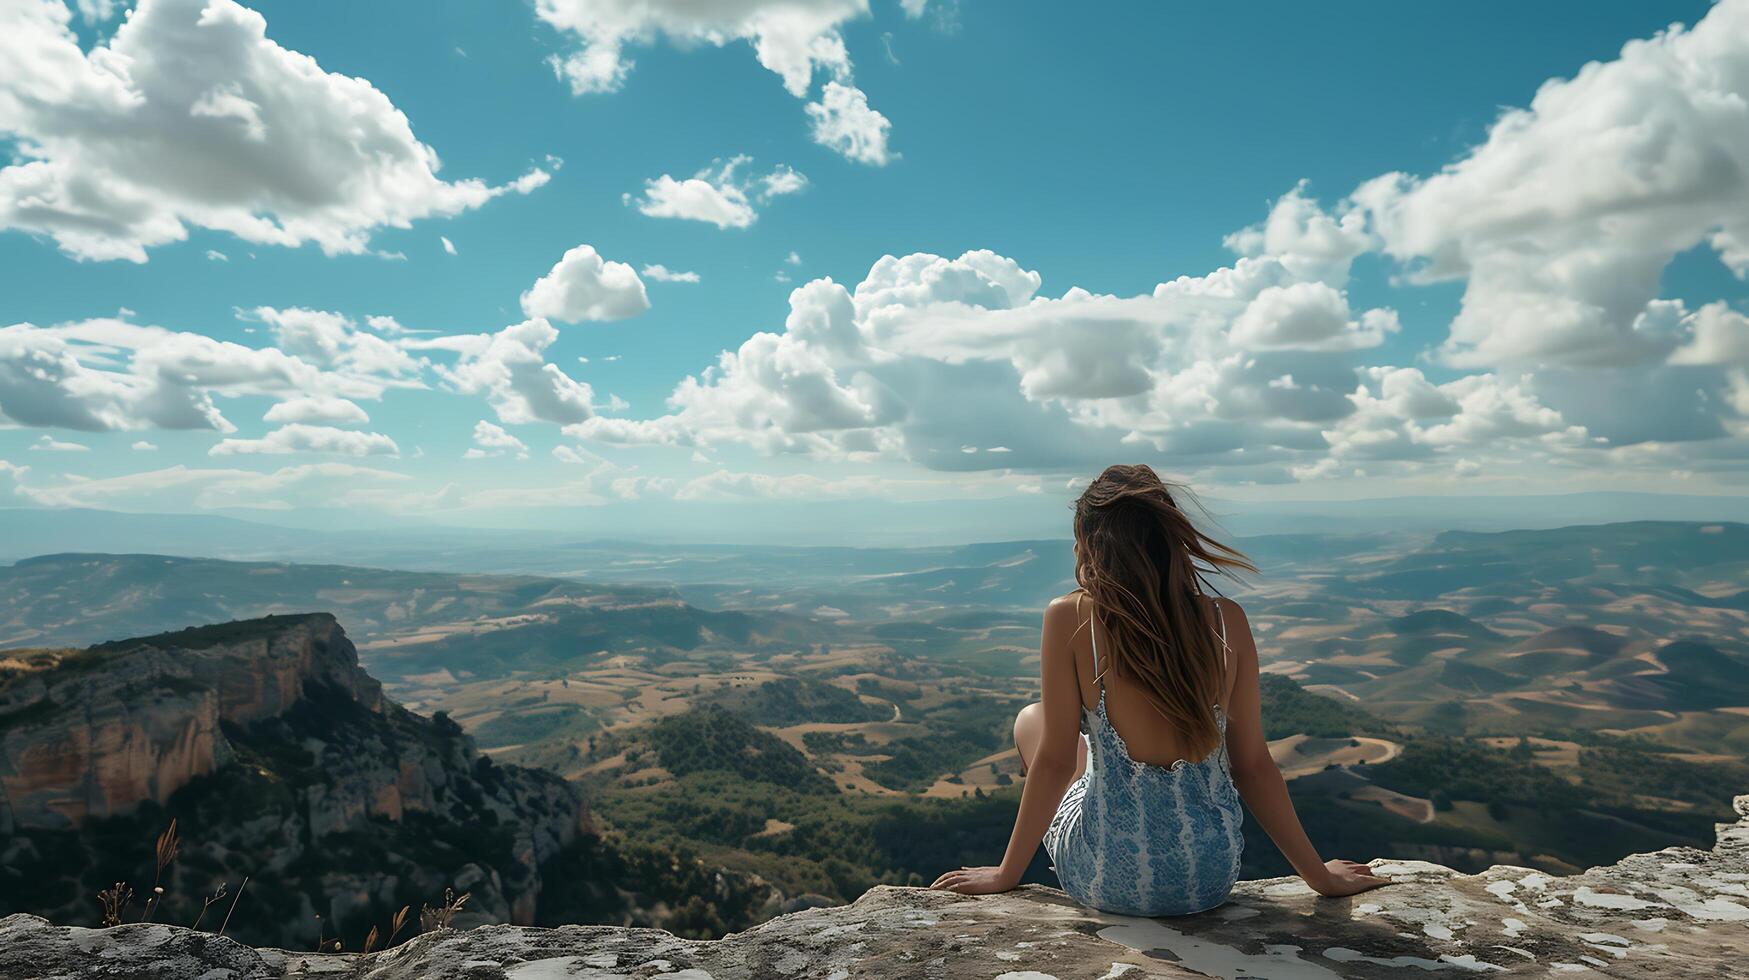 AI generated Woman Contemplates Majestic Mountain View on Cliff Edge under Clear Blue Sky with Fluffy Clouds photo